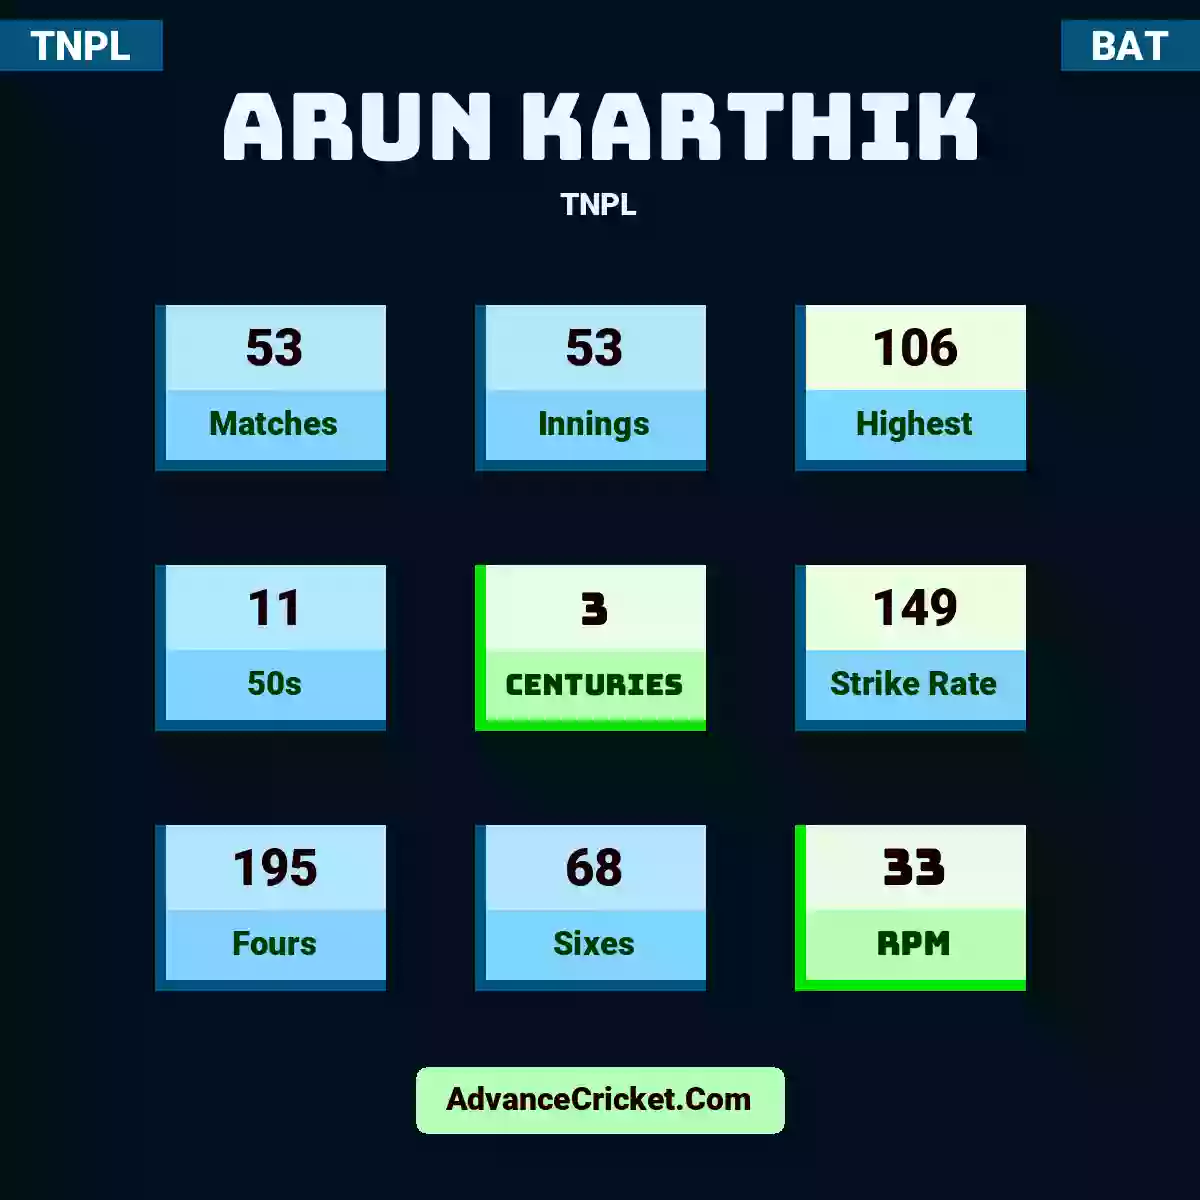 Arun Karthik TNPL , Arun Karthik played 53 matches, scored 106 runs as highest, 11 half-centuries, and 3 centuries, with a strike rate of 149. A.Karthik hit 195 fours and 68 sixes, with an RPM of 33.